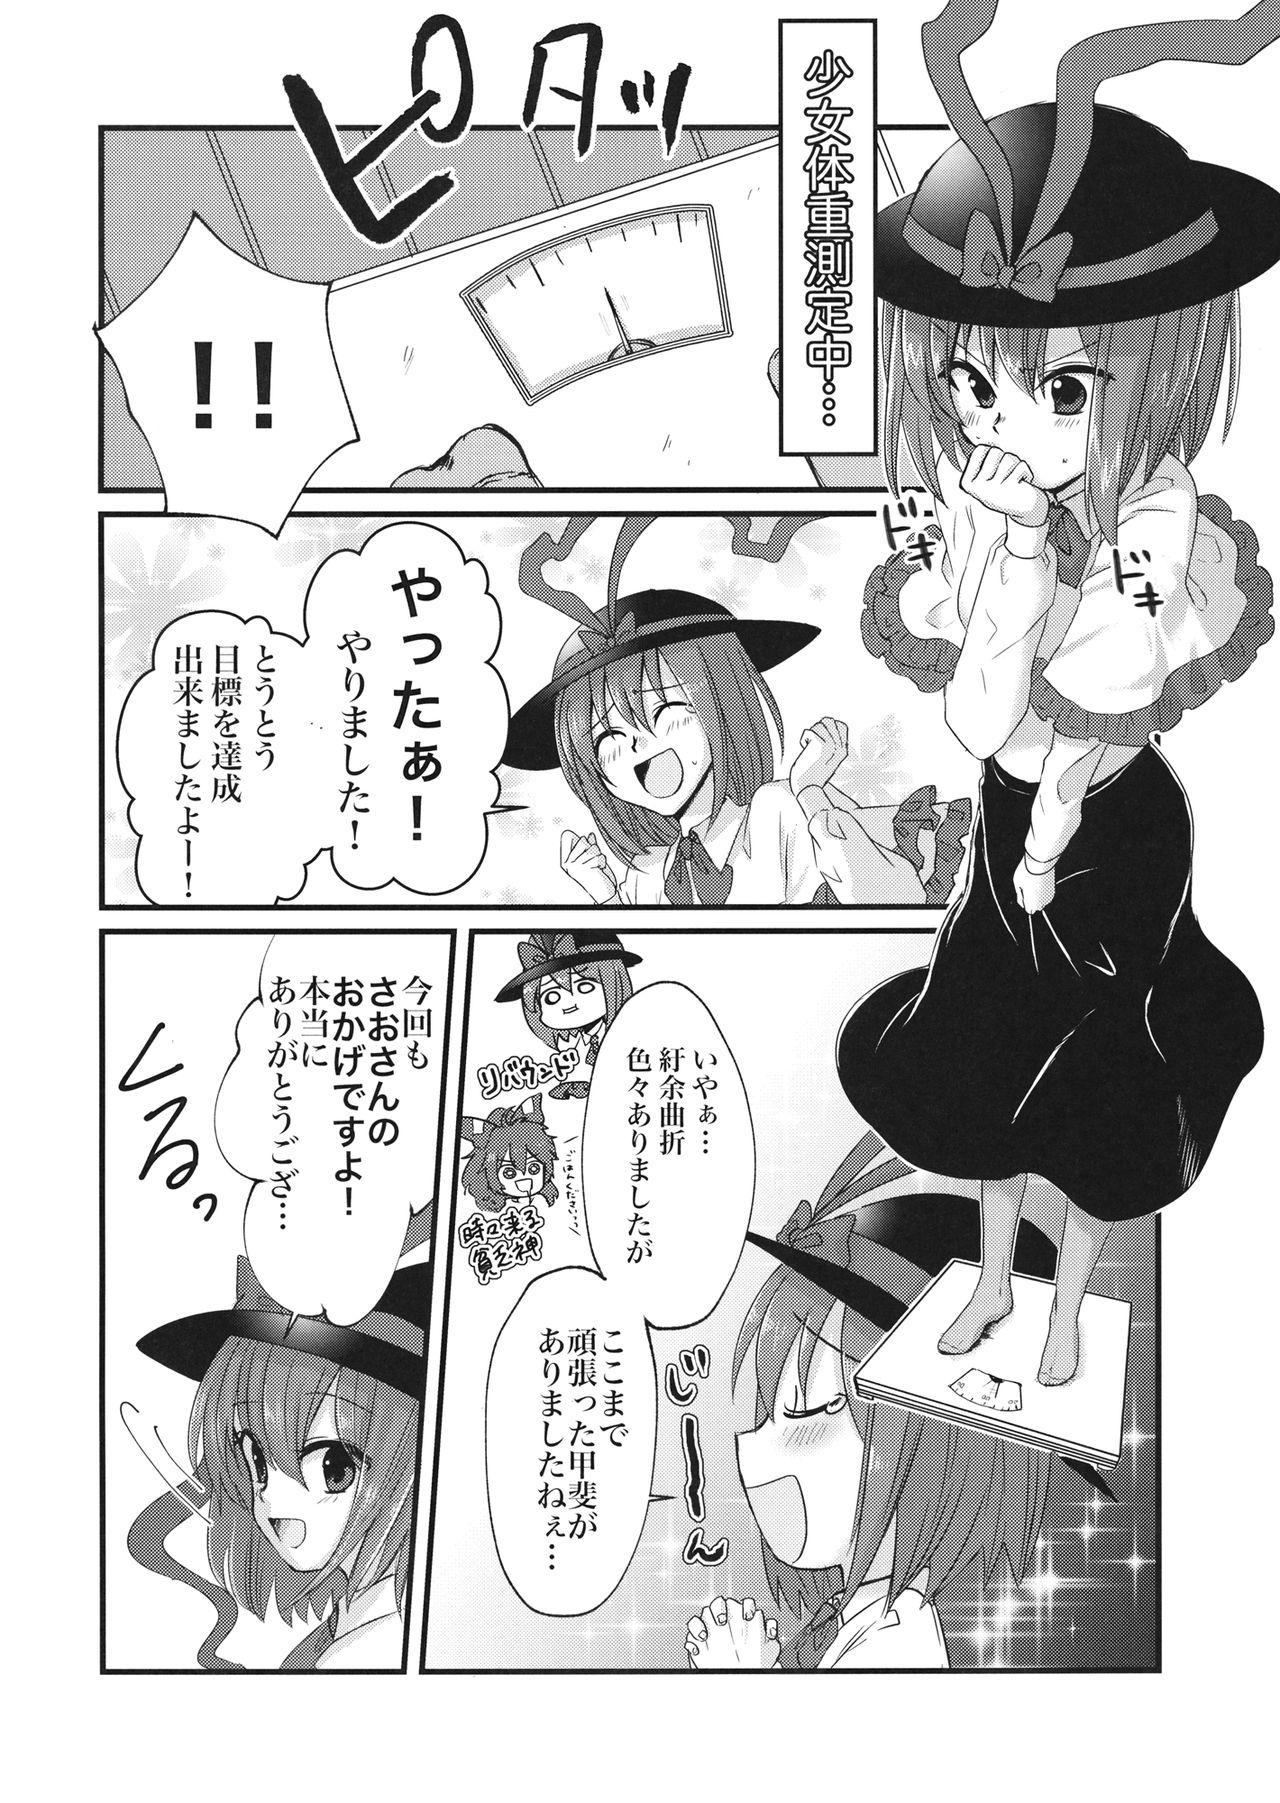 Family Porn 衣玖さんと一緒に色々頑張る本 - Touhou project Pussyeating - Page 3